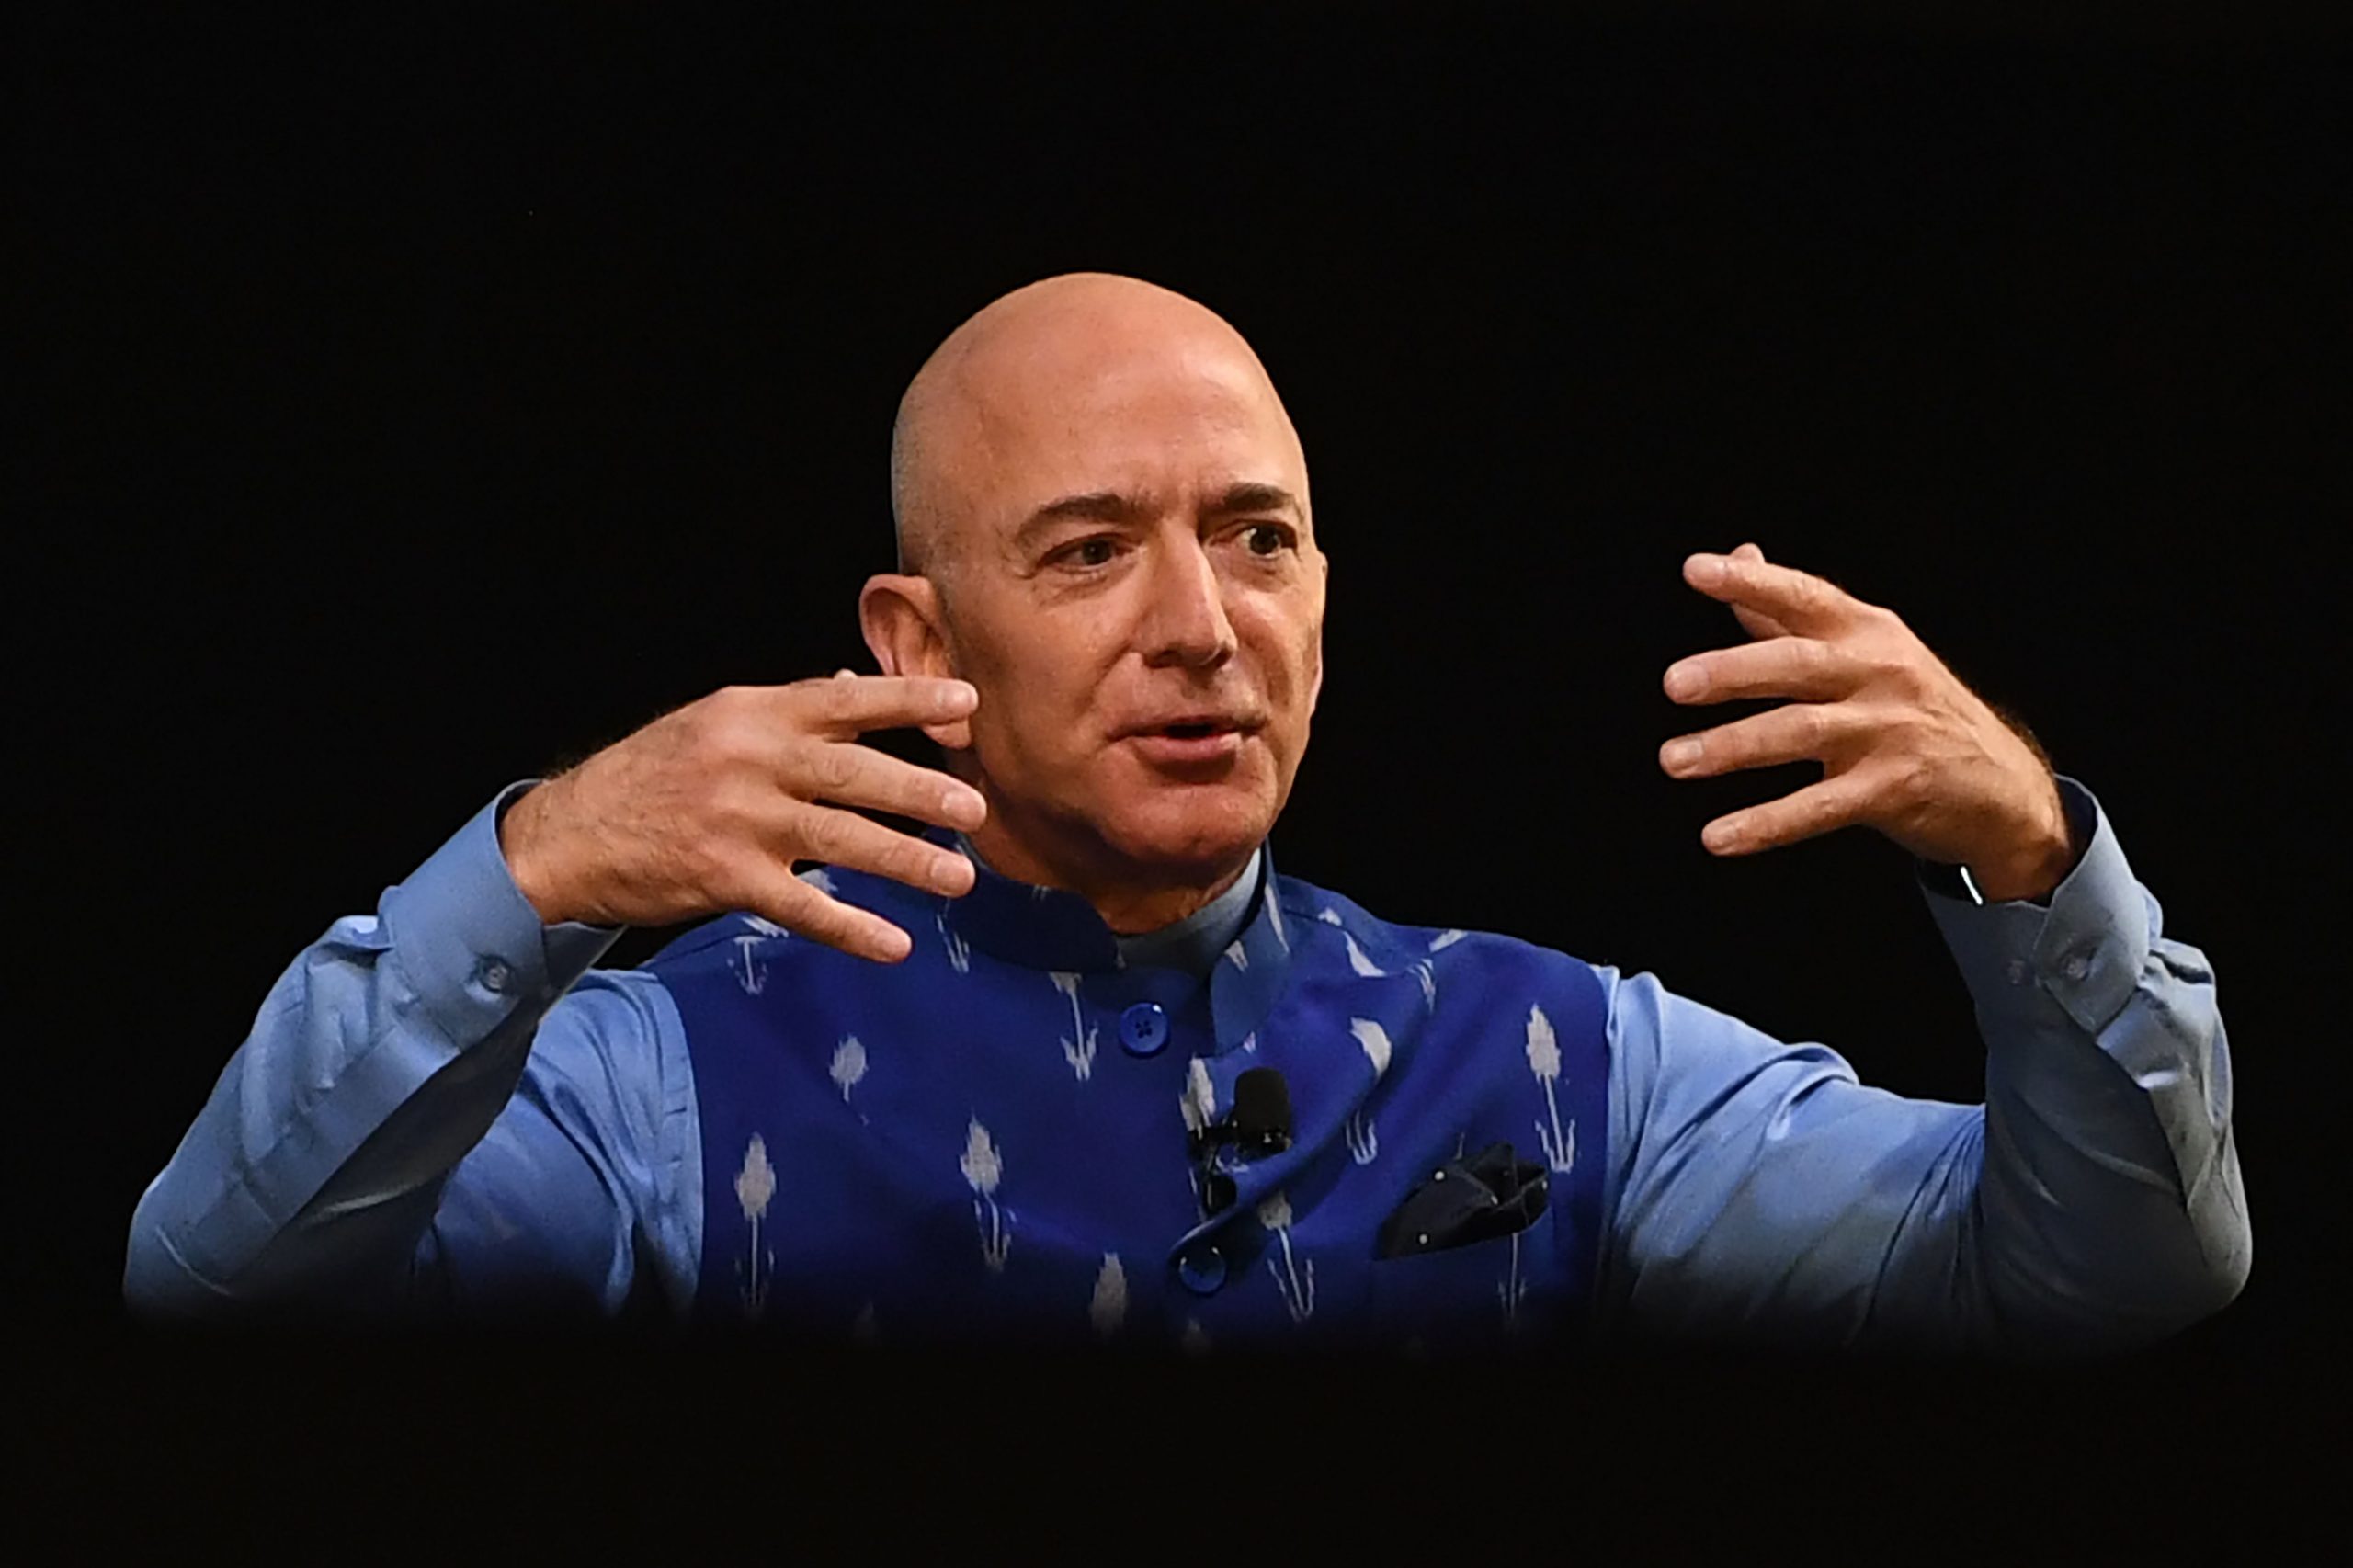 Jeff Bezos’ net worth might jet off to space with him as Amazon shares rise 4.7%